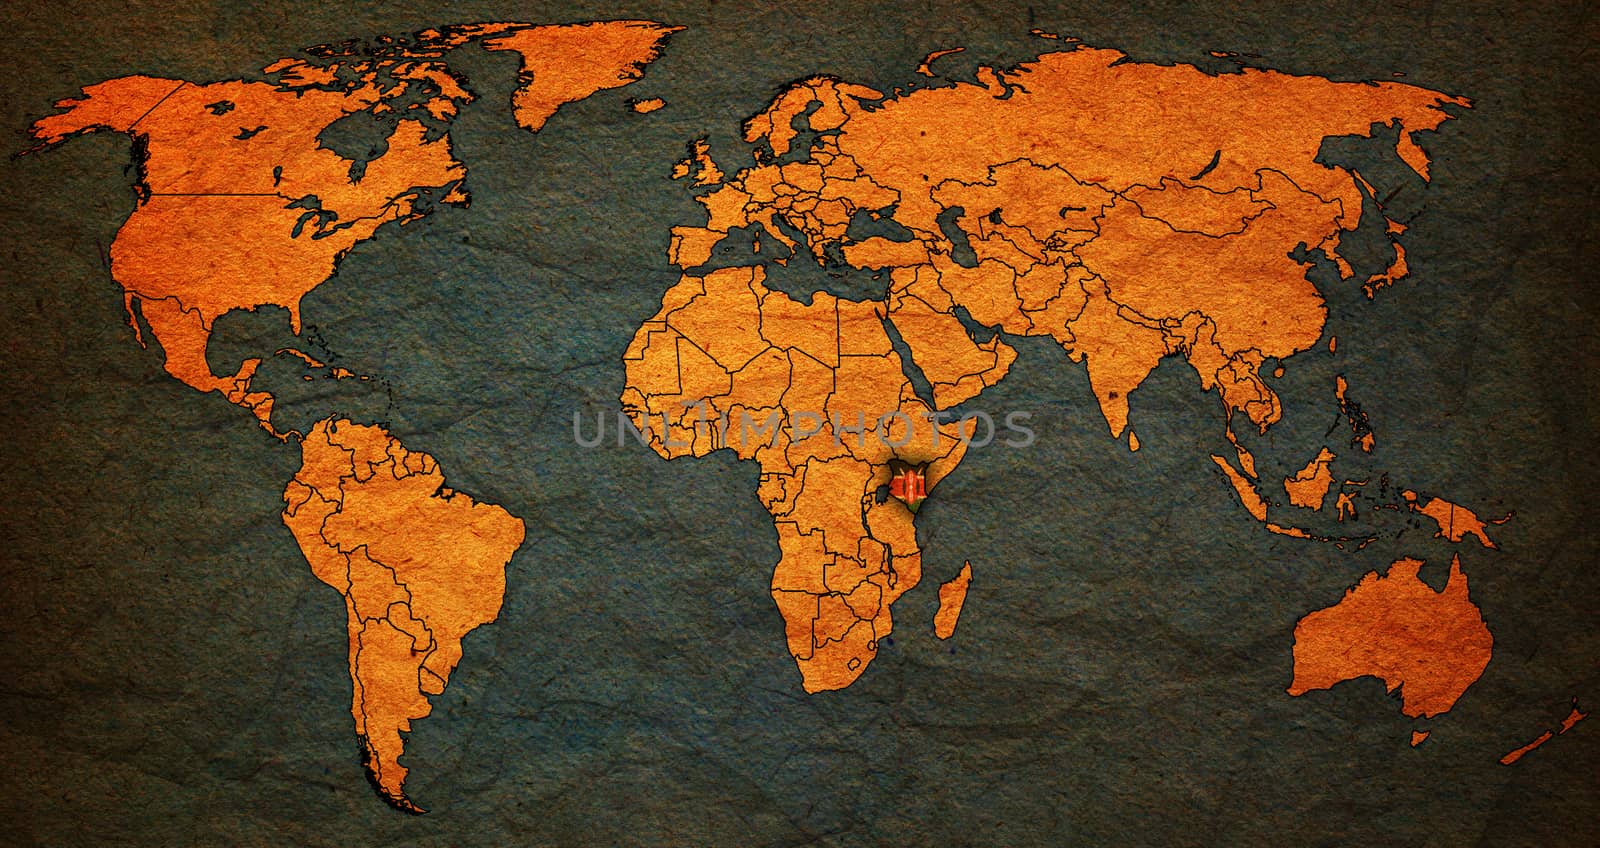 kenya territory on actual world map by michal812